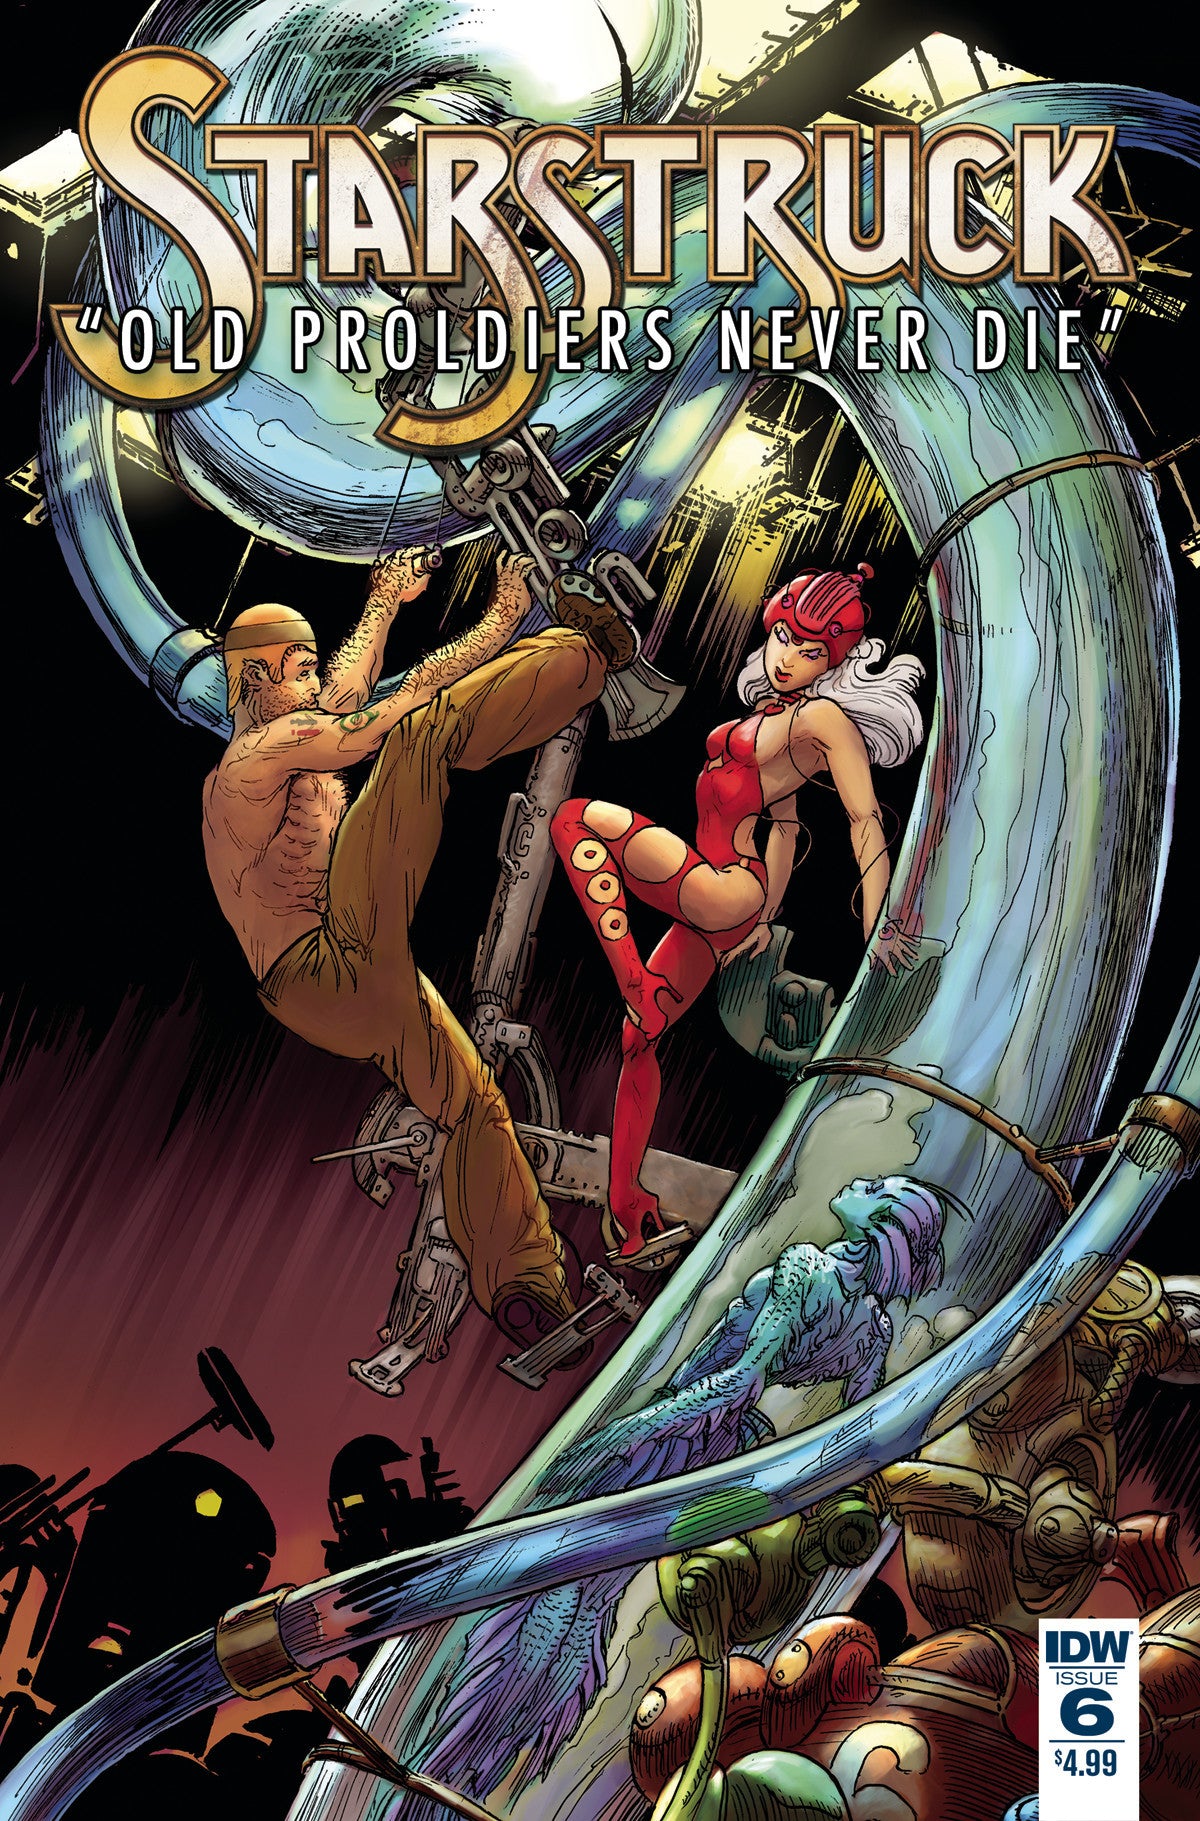 STARSTRUCK OLD PROLDIERS NEVER DIE #6 (OF 6) COVER